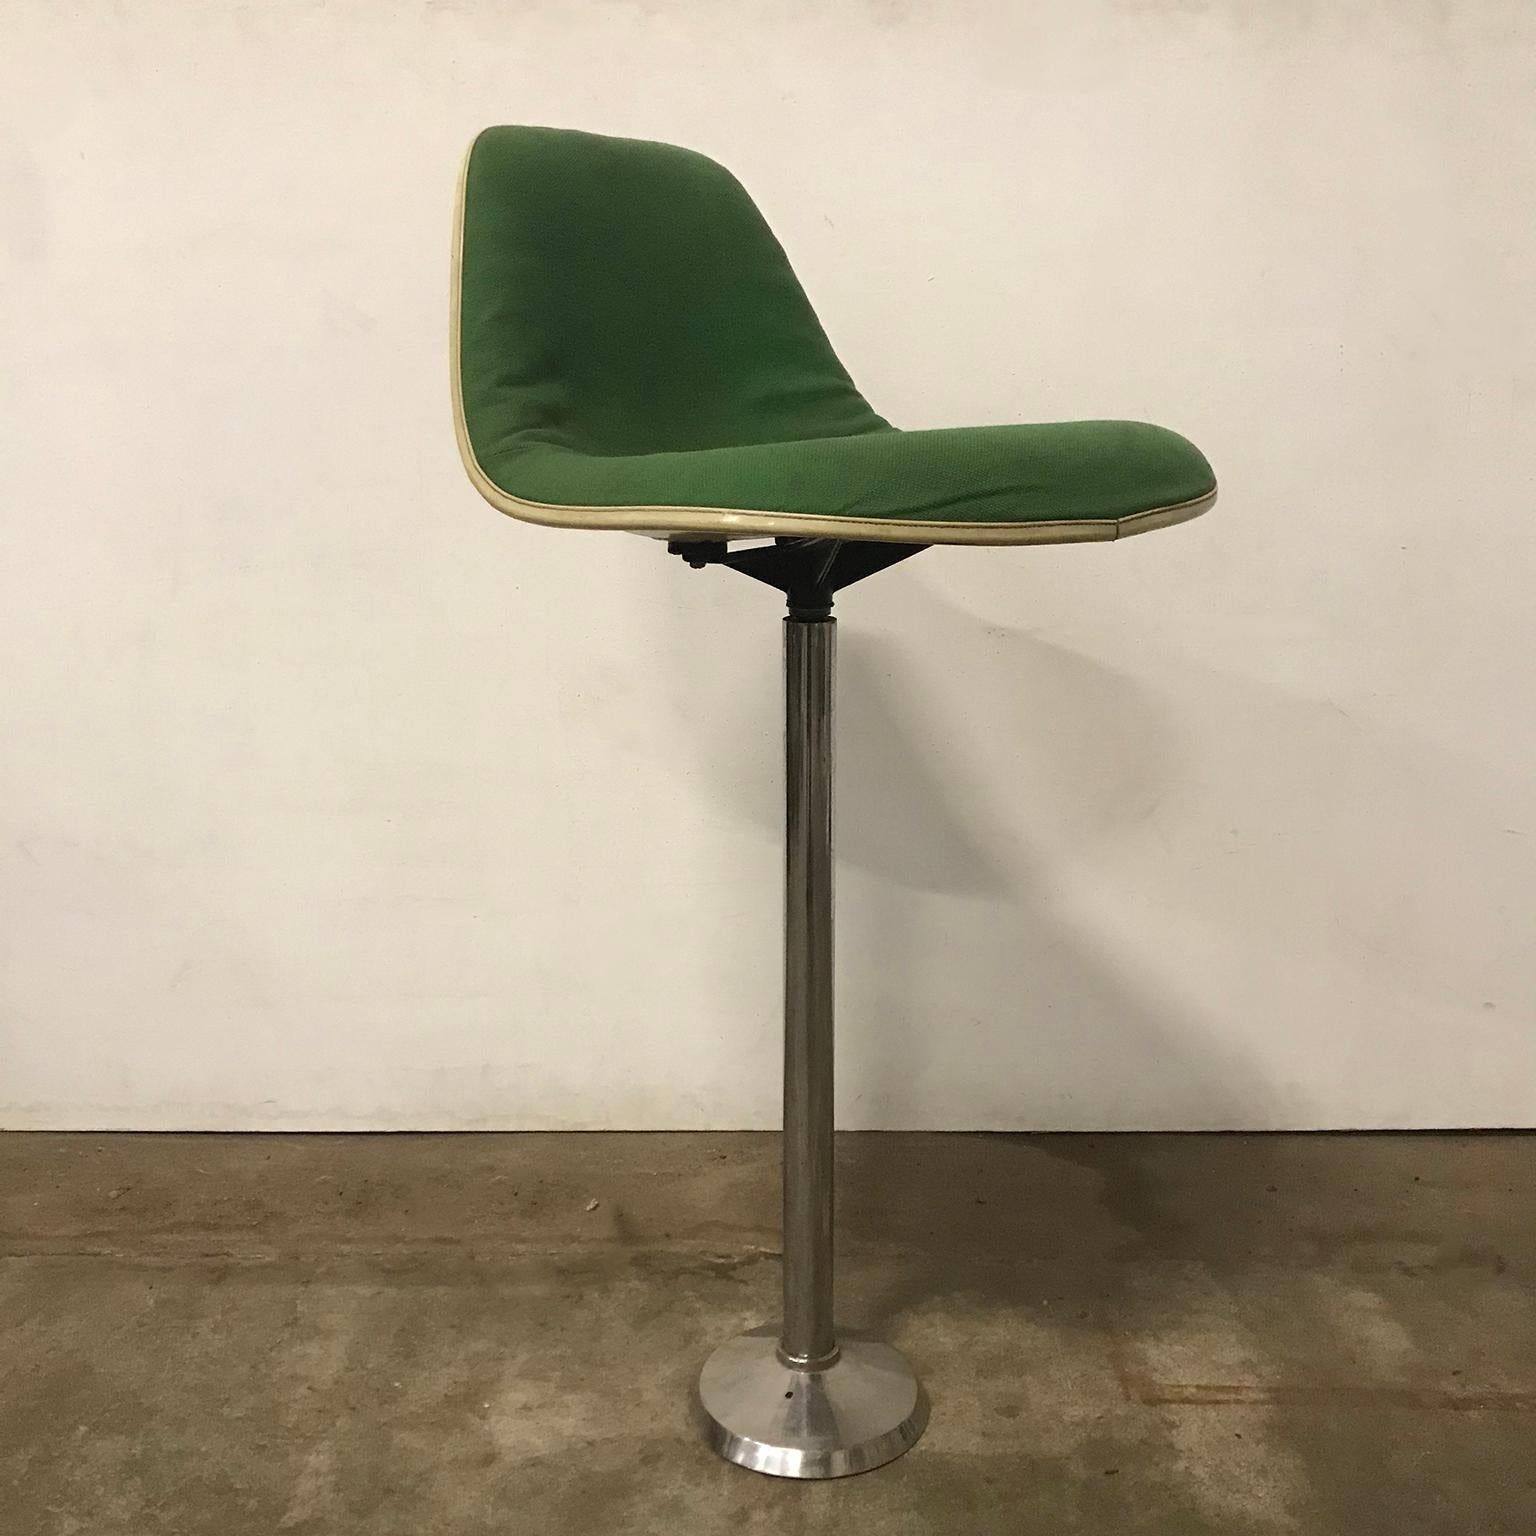 Mid-Century Modern 1969 Eames Herman Miller/Fehlbaum Extremely Rare White Barstools in Green Fabric For Sale